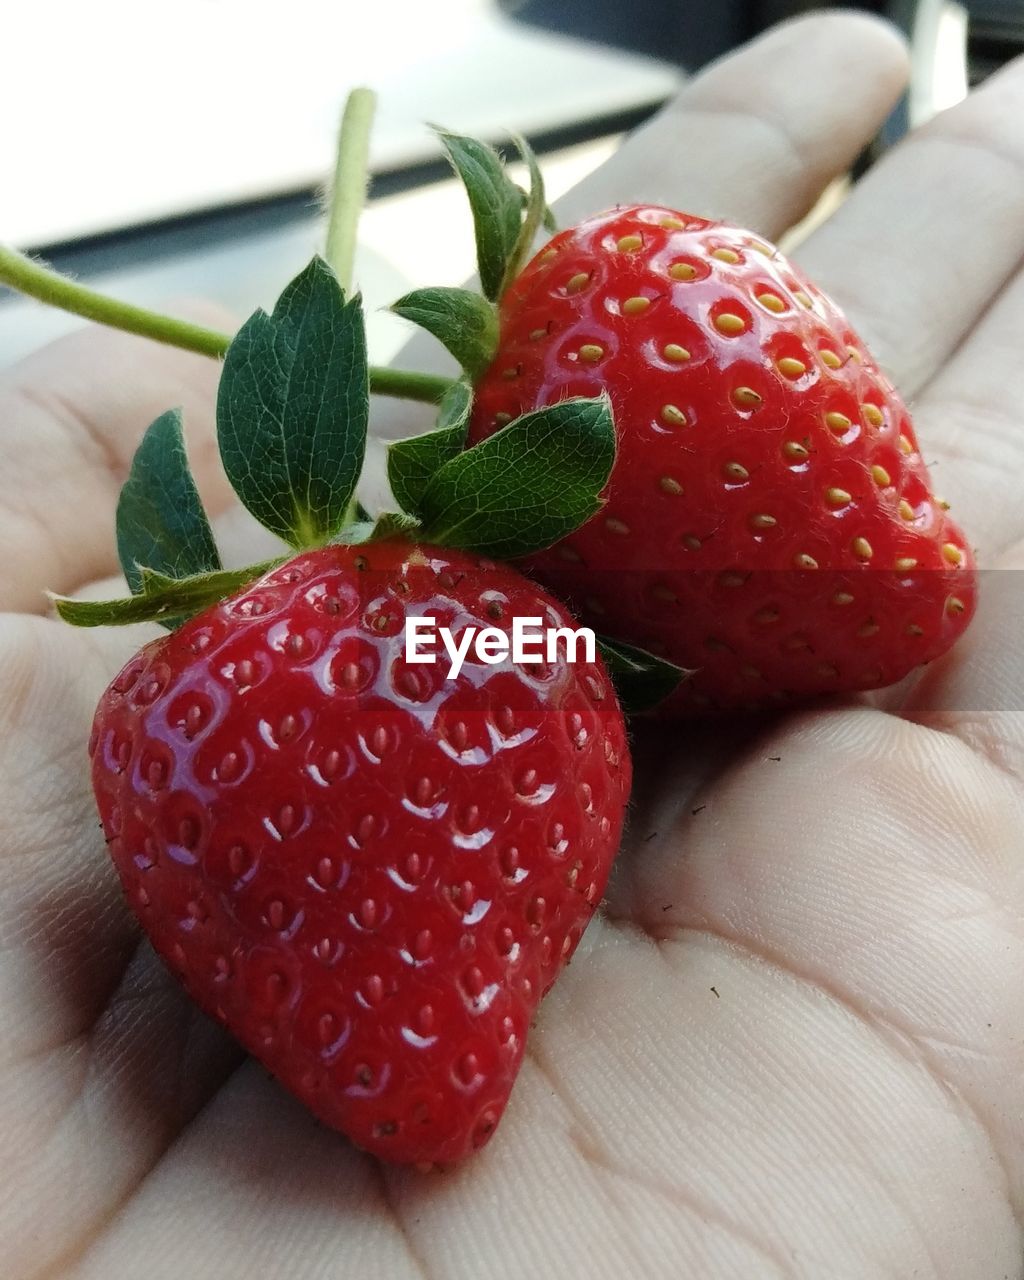 CLOSE-UP OF STRAWBERRIES ON HAND